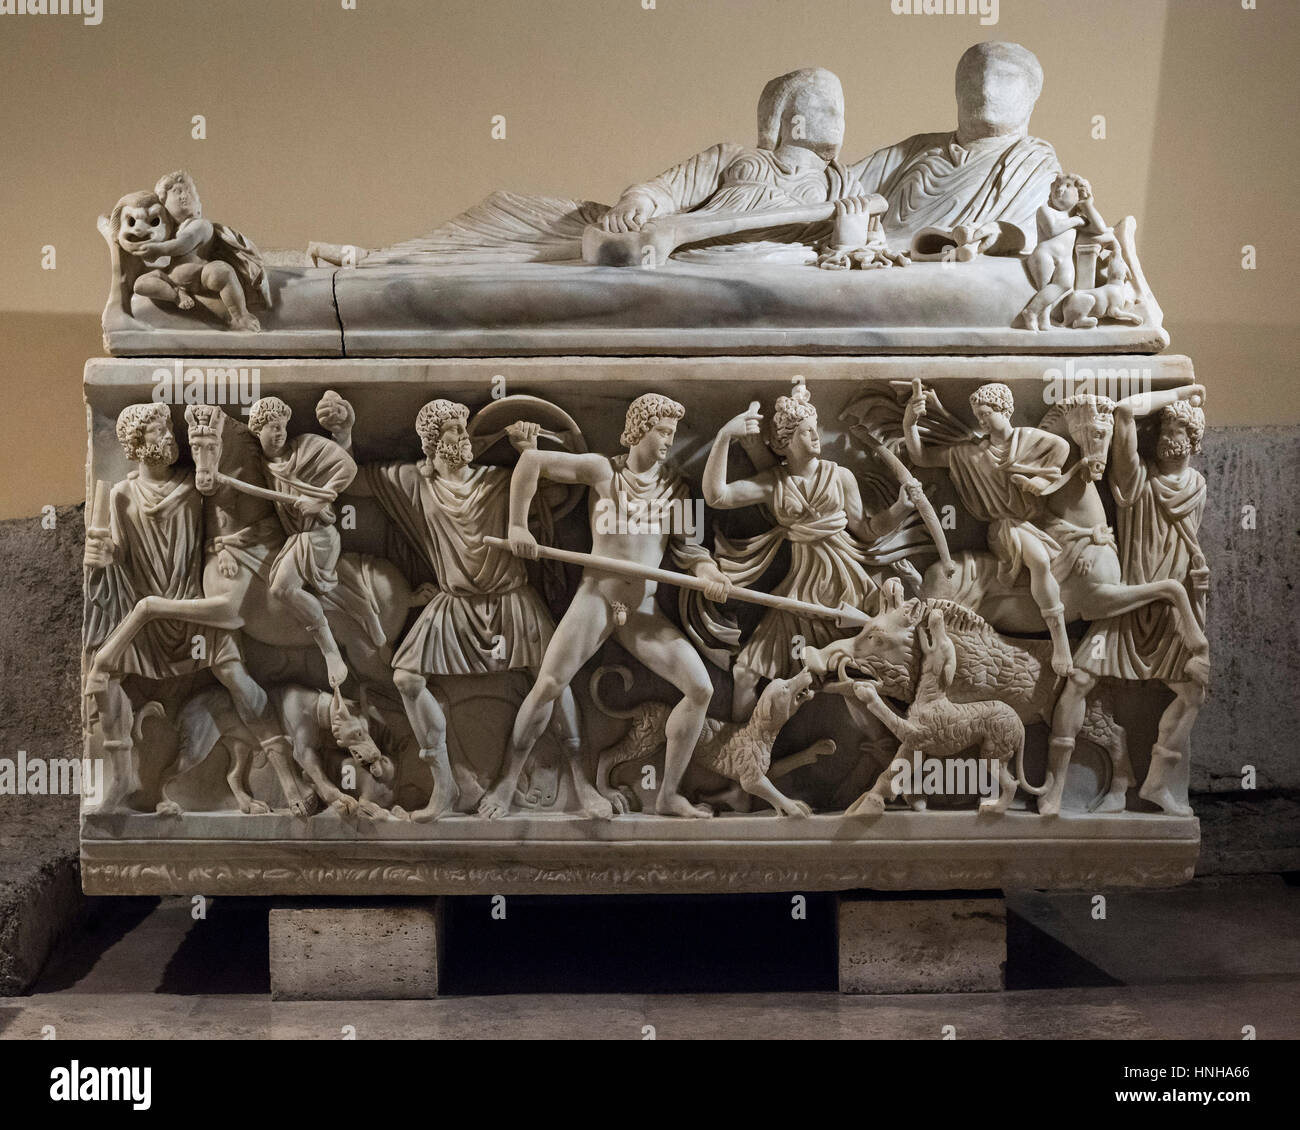 Rome. Italy. Roman sarcophagus depicting the myth of Meleager and the hunt for the Calydonian boar, 3rd century AD. Capitoline Museum. Musei Capitolin Stock Photo